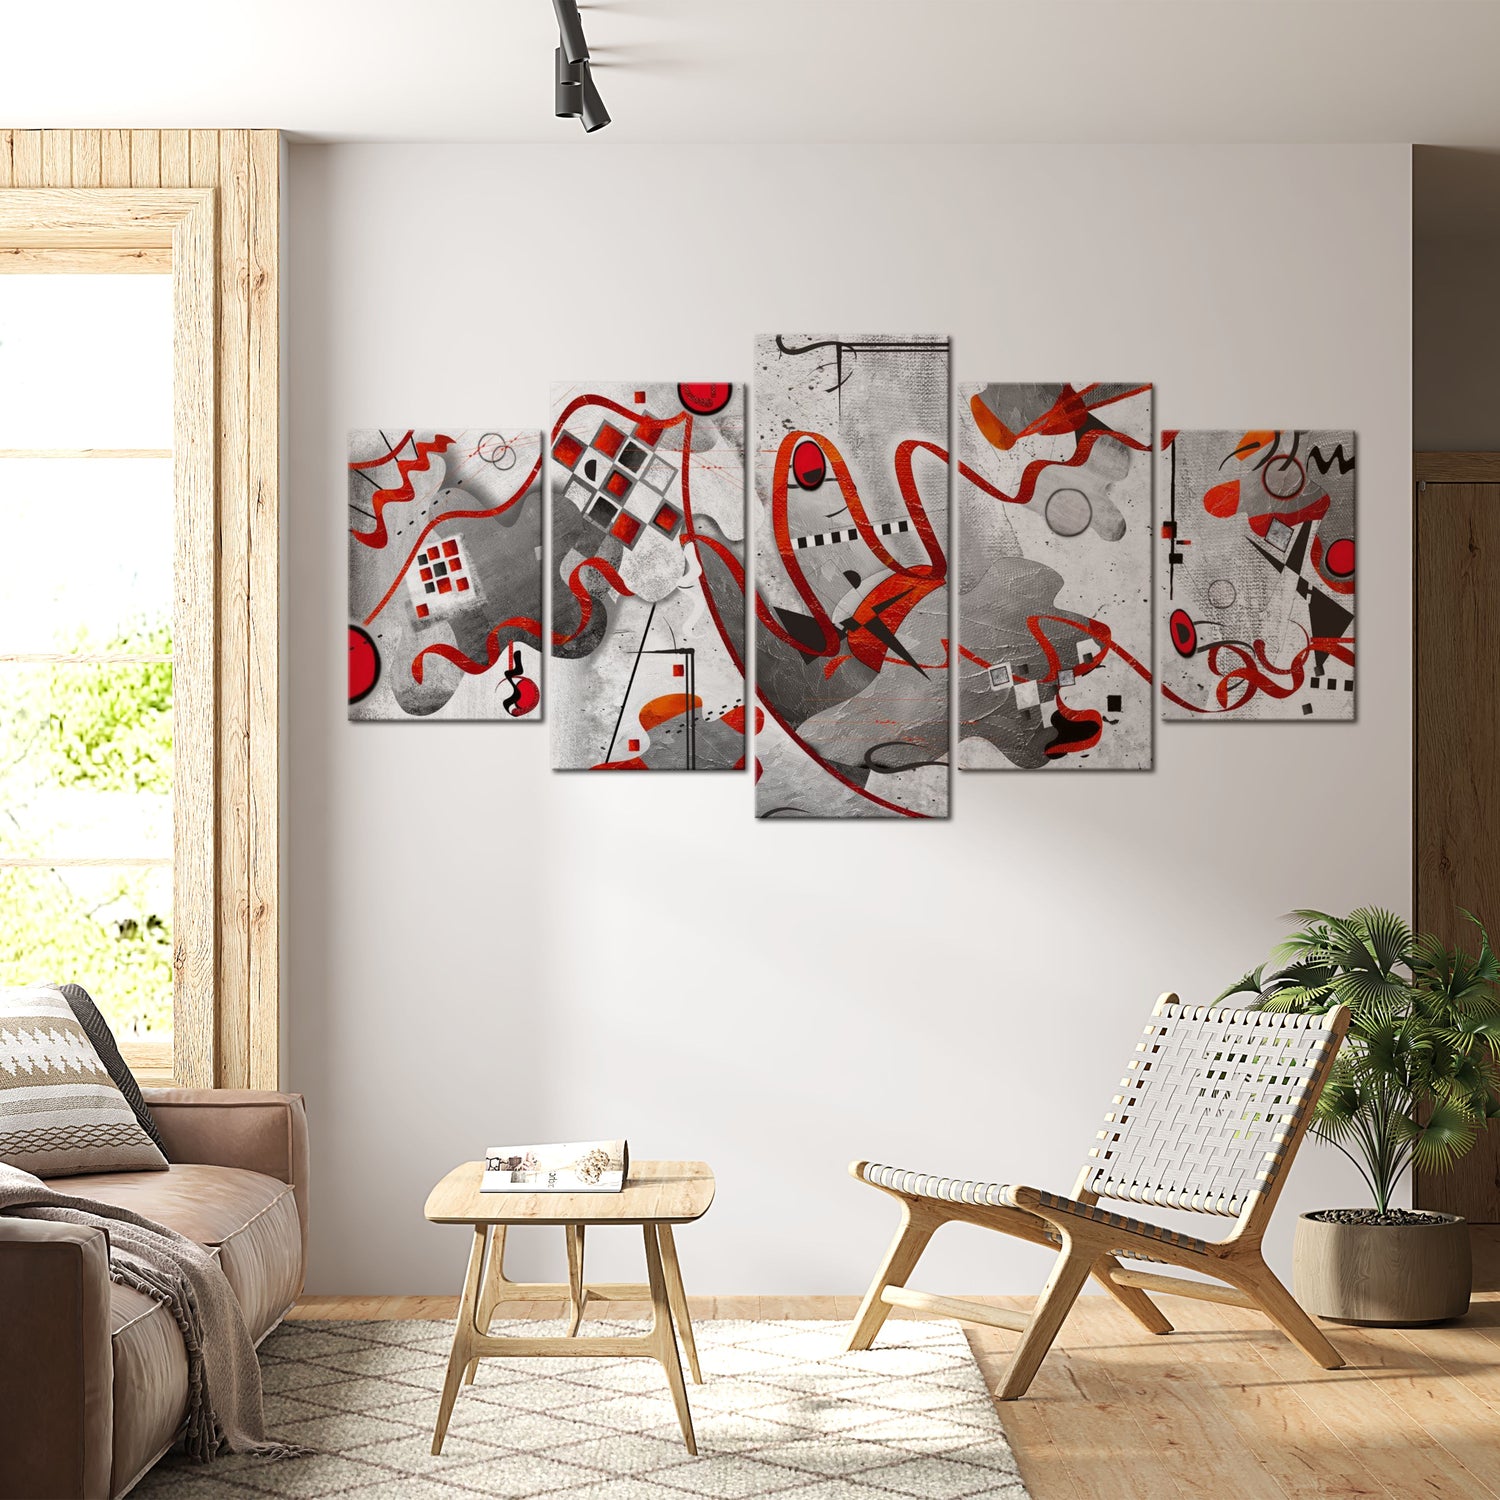 Abstract Canvas Wall Art - Between Waves - 5 Pieces